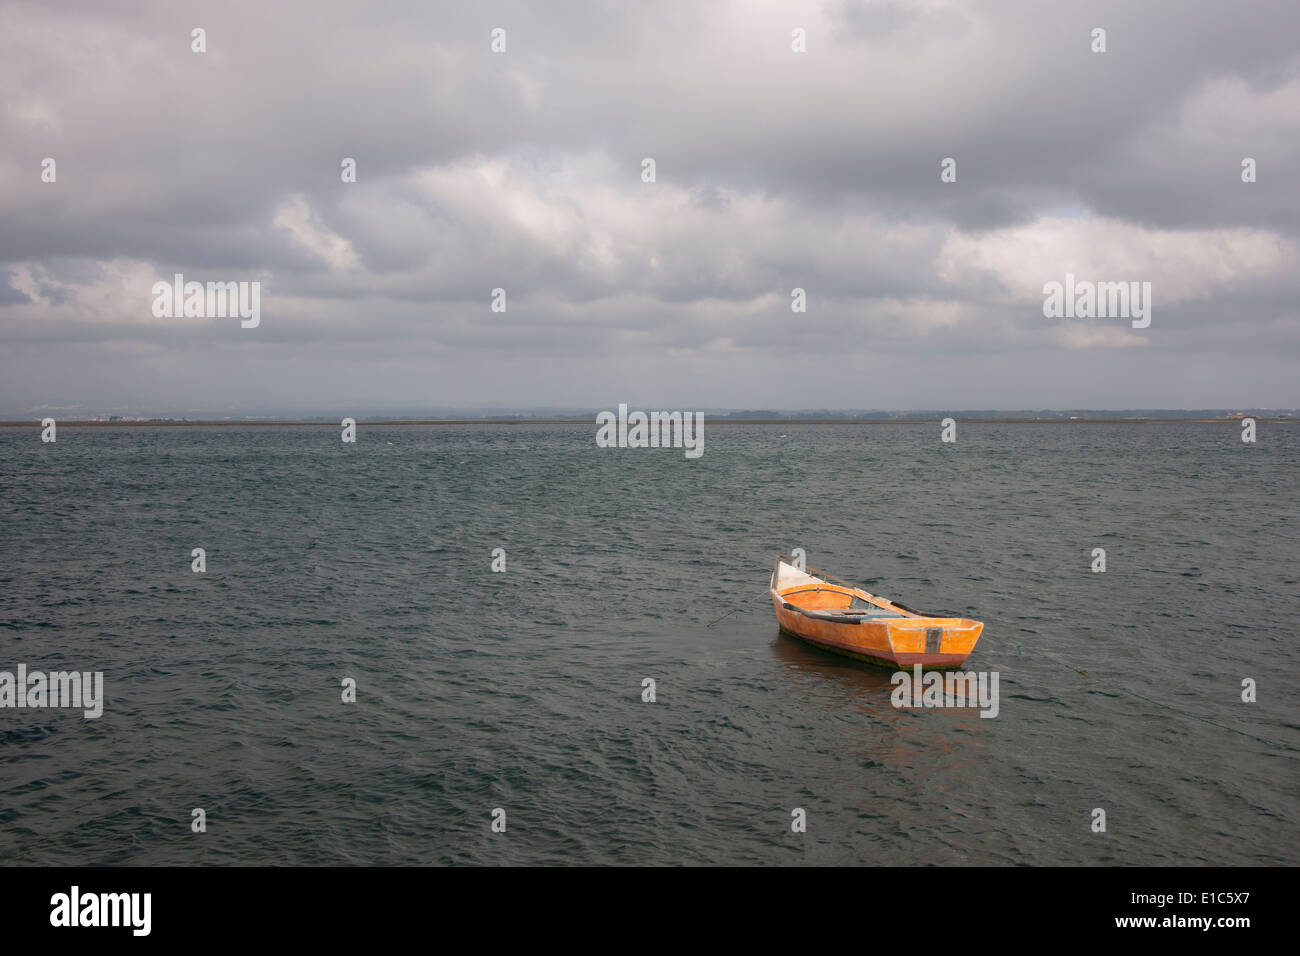 A small wooden boat moored in open water, off the Portuguese coast. Stock Photo